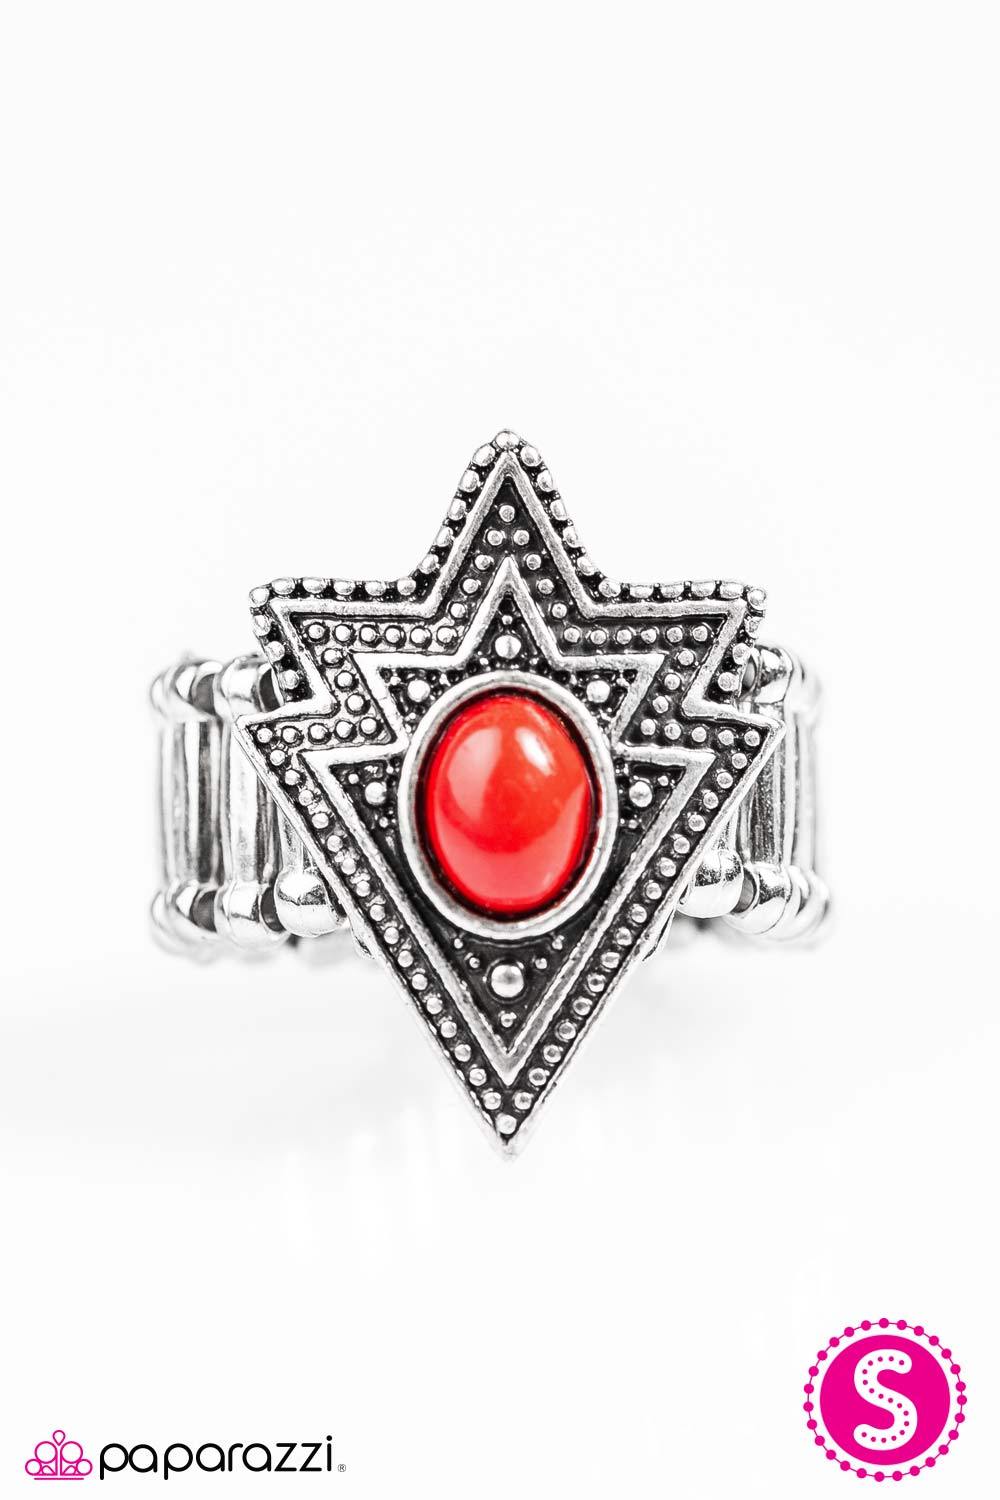 Tribe Vibe Silver and Red Ring - Paparazzi Accessories-CarasShop.com - $5 Jewelry by Cara Jewels